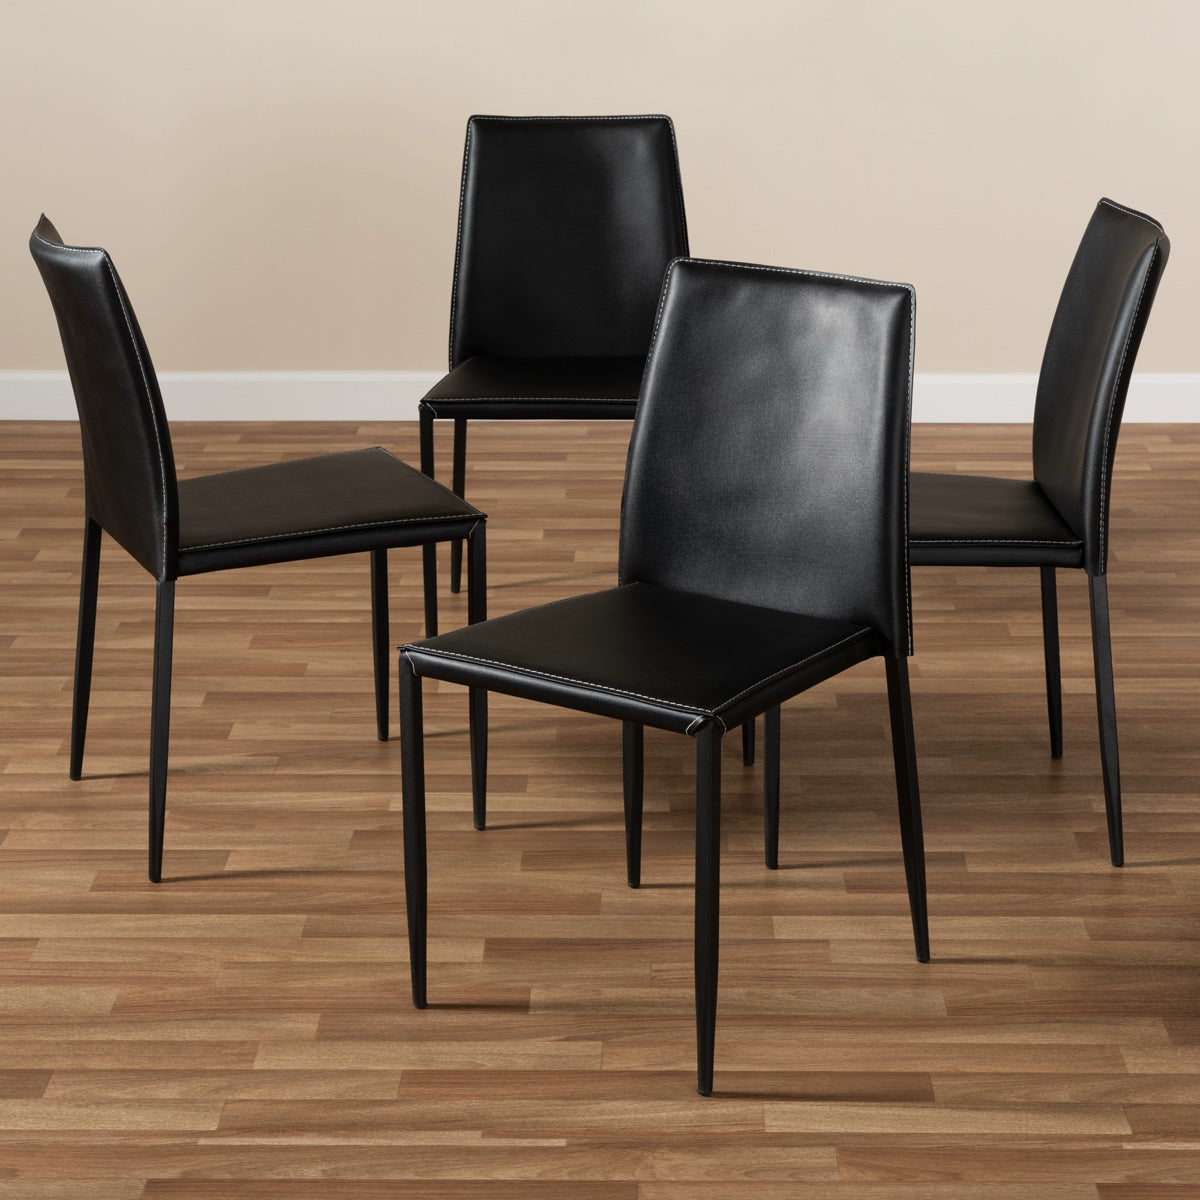 Baxton Studio Pascha Modern and Contemporary Black Faux Leather Upholstered Dining Chair (Set of 4) Baxton Studio-dining chair-Minimal And Modern - 4